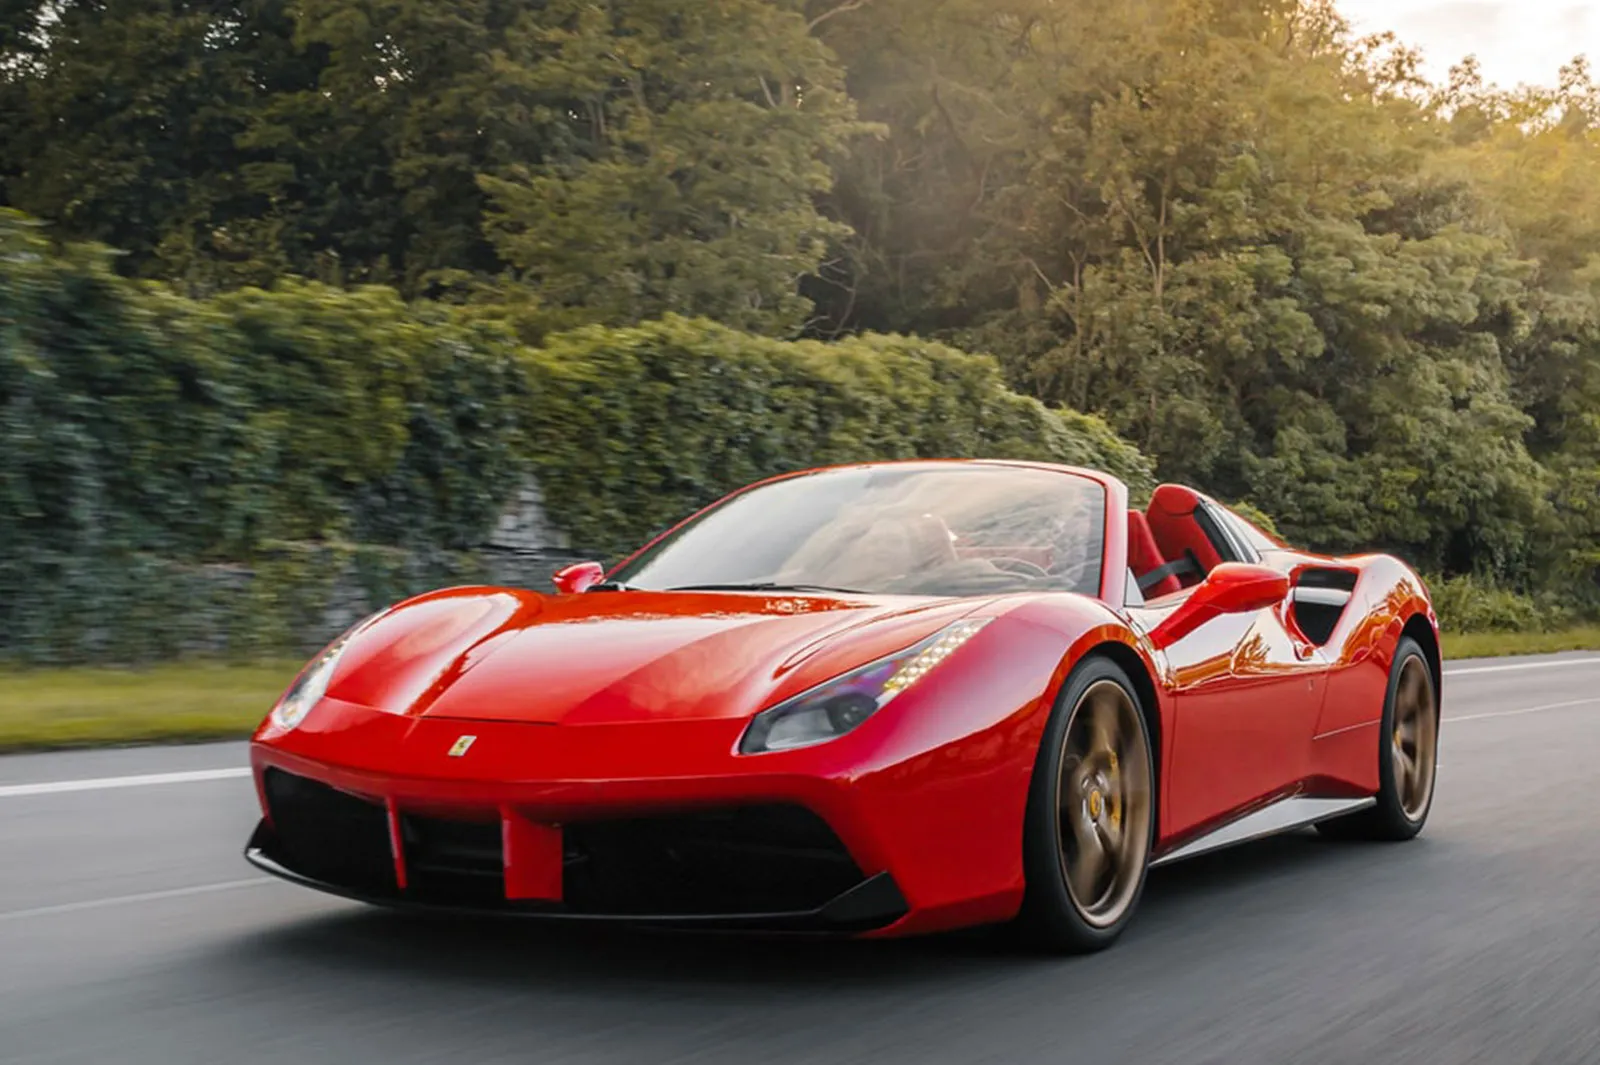 Drive a Ferrari on a luxury Upstate New York vacation package